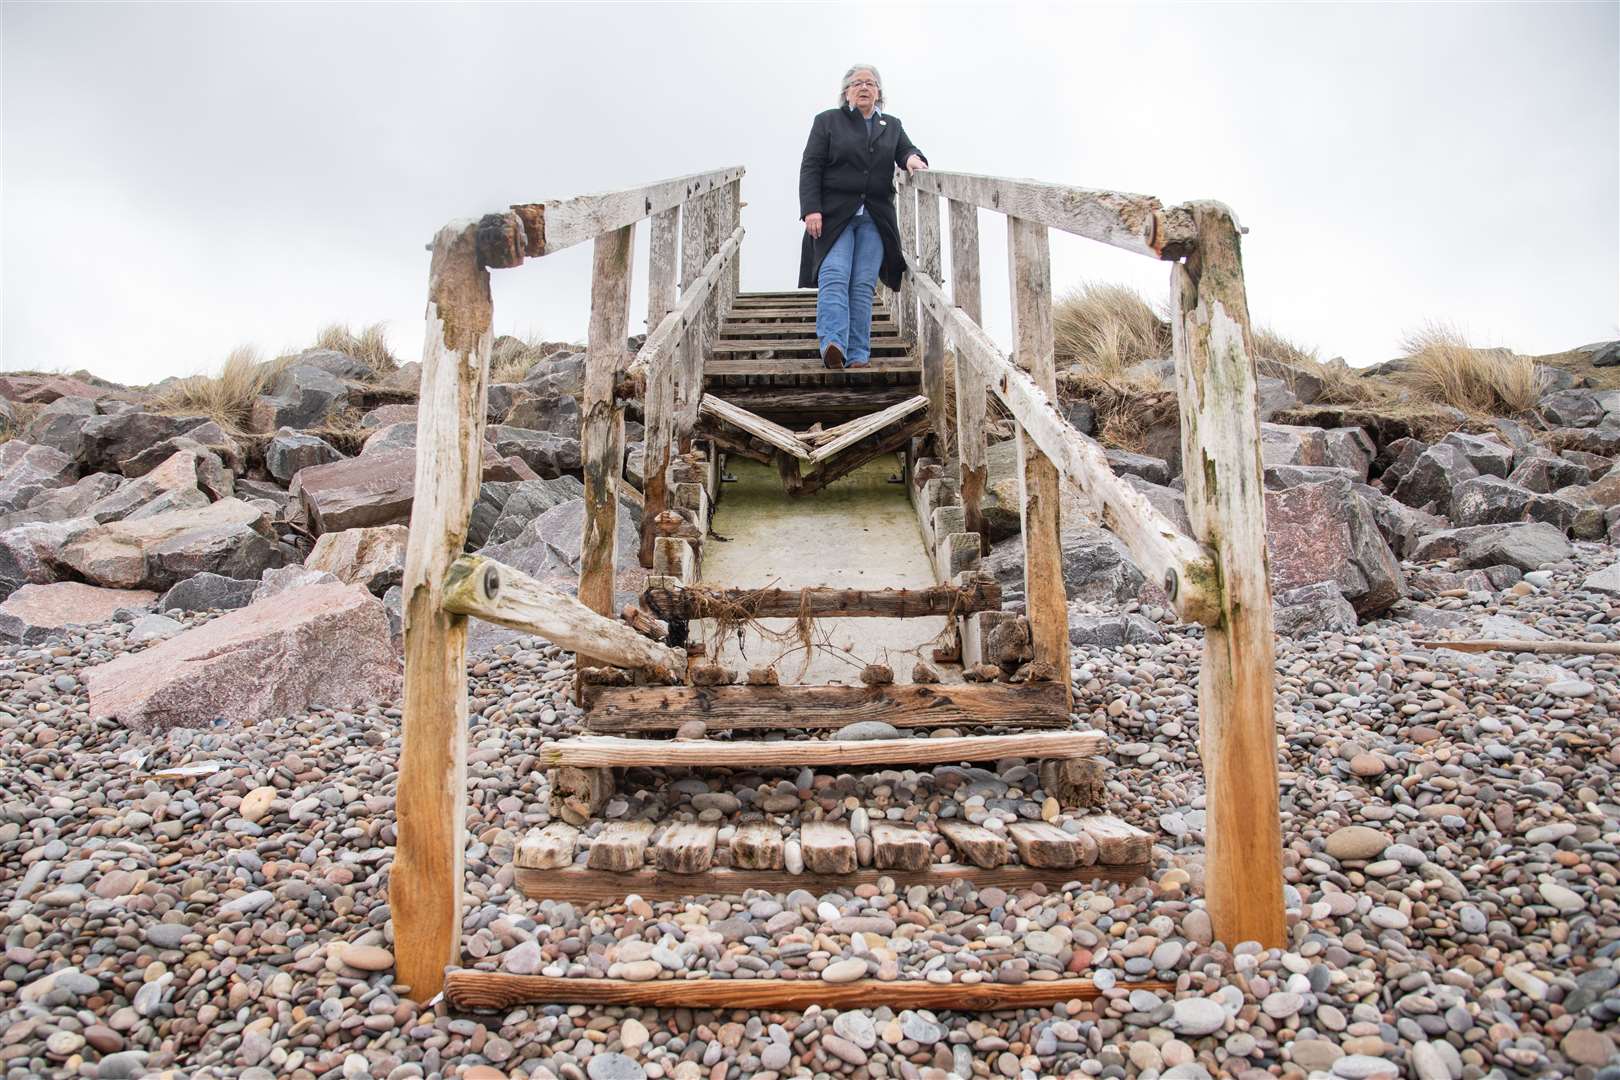 The Findhorn Village Conservation Company secretary Cathy Low on a badly damaged set of steps.